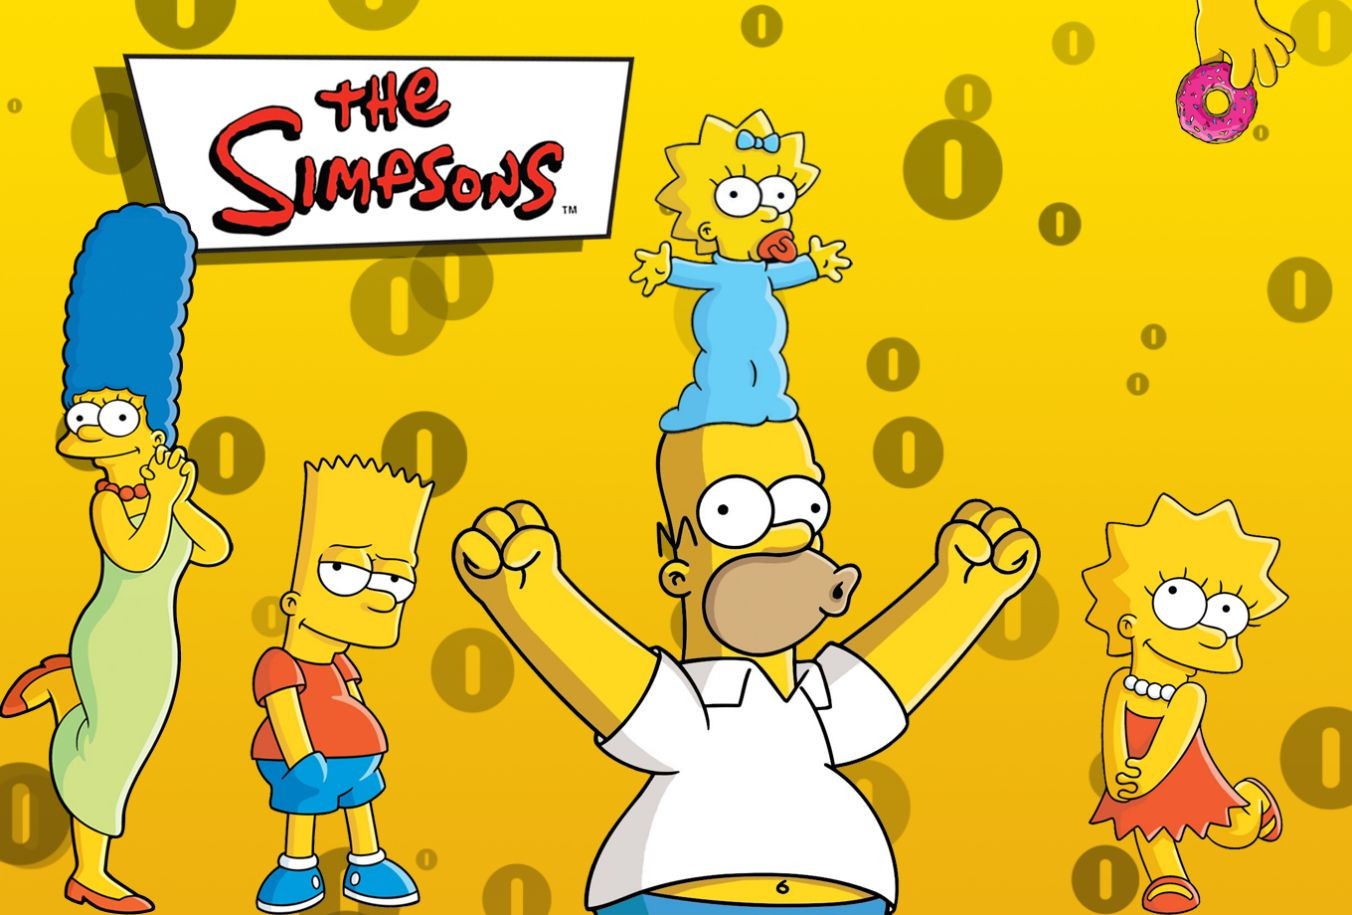 General 1352x915 The Simpsons Marge Simpson Bart Simpson Maggie Simpson Homer Simpson Lisa Simpson TV series cartoon